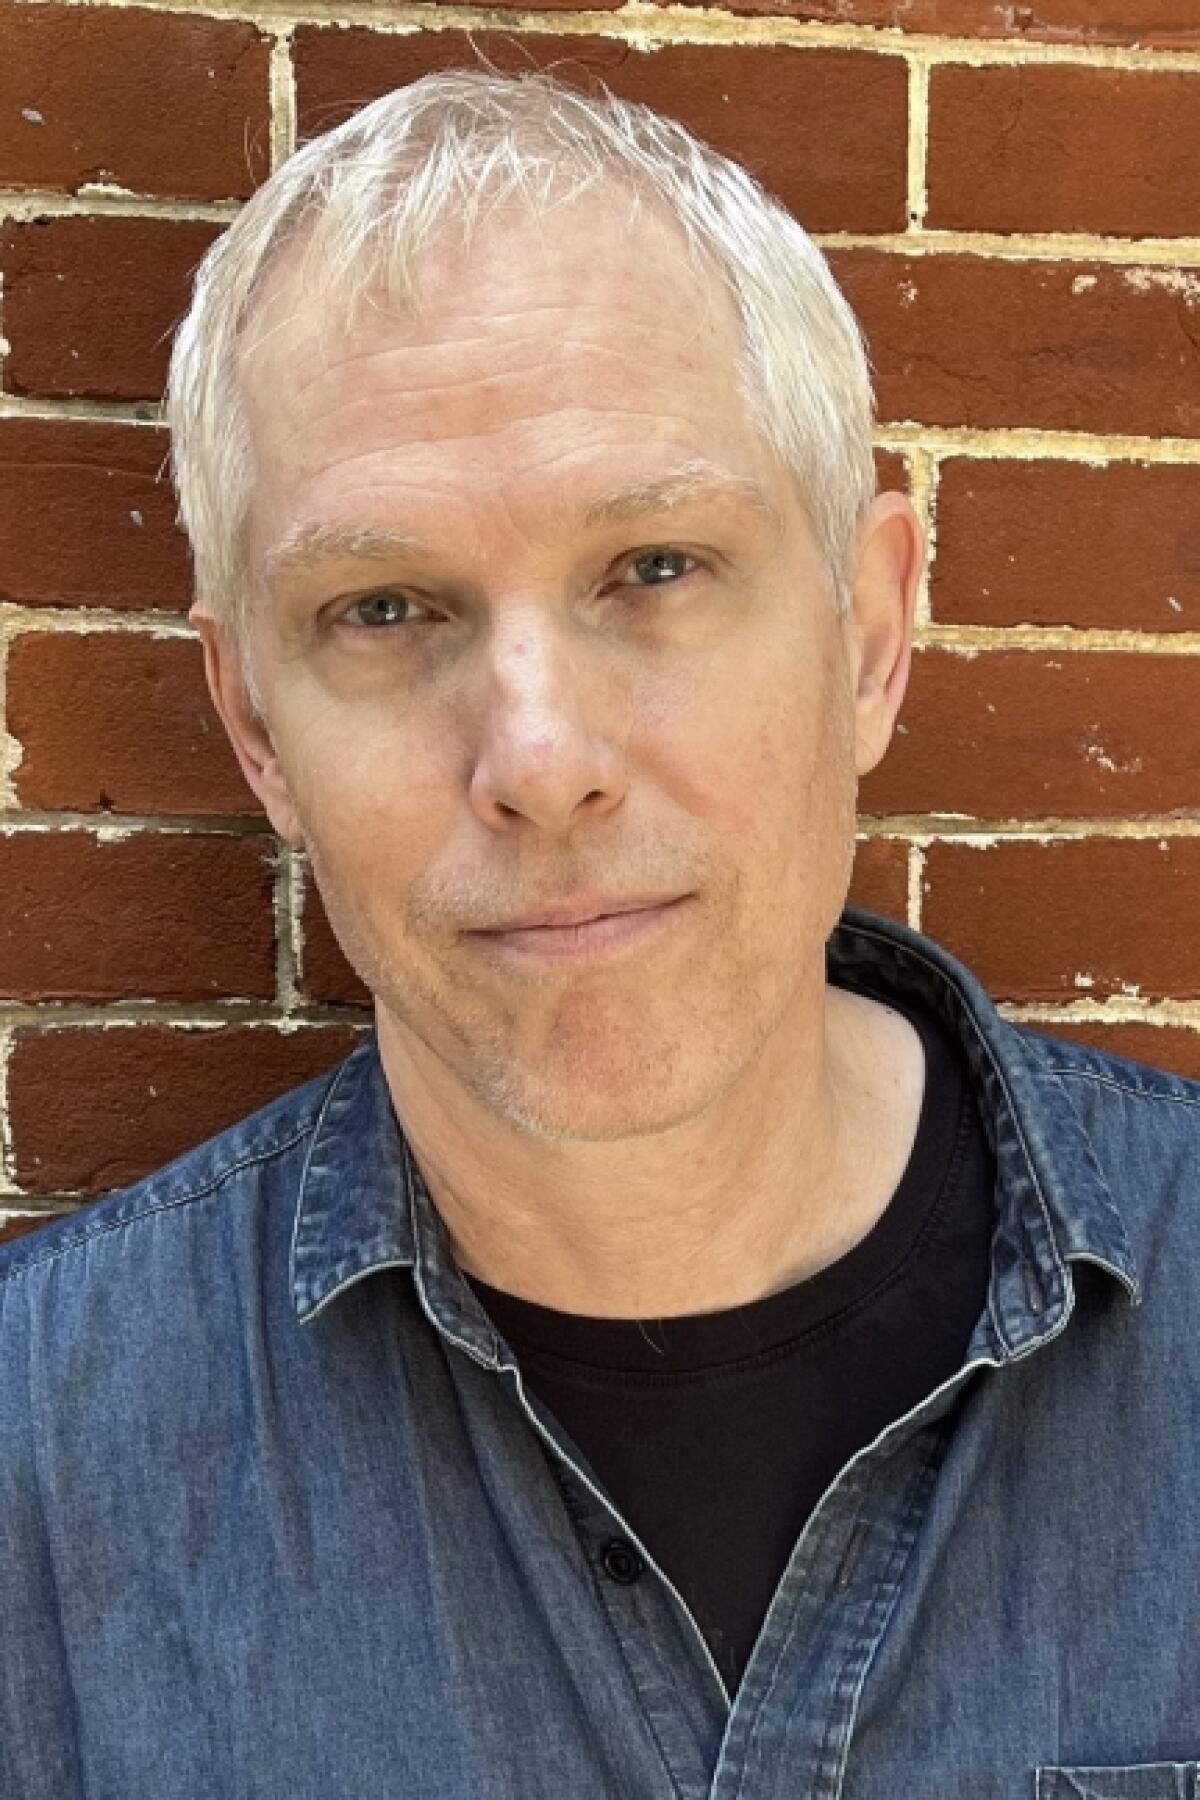 A white man with grey hair in front of a brick wall